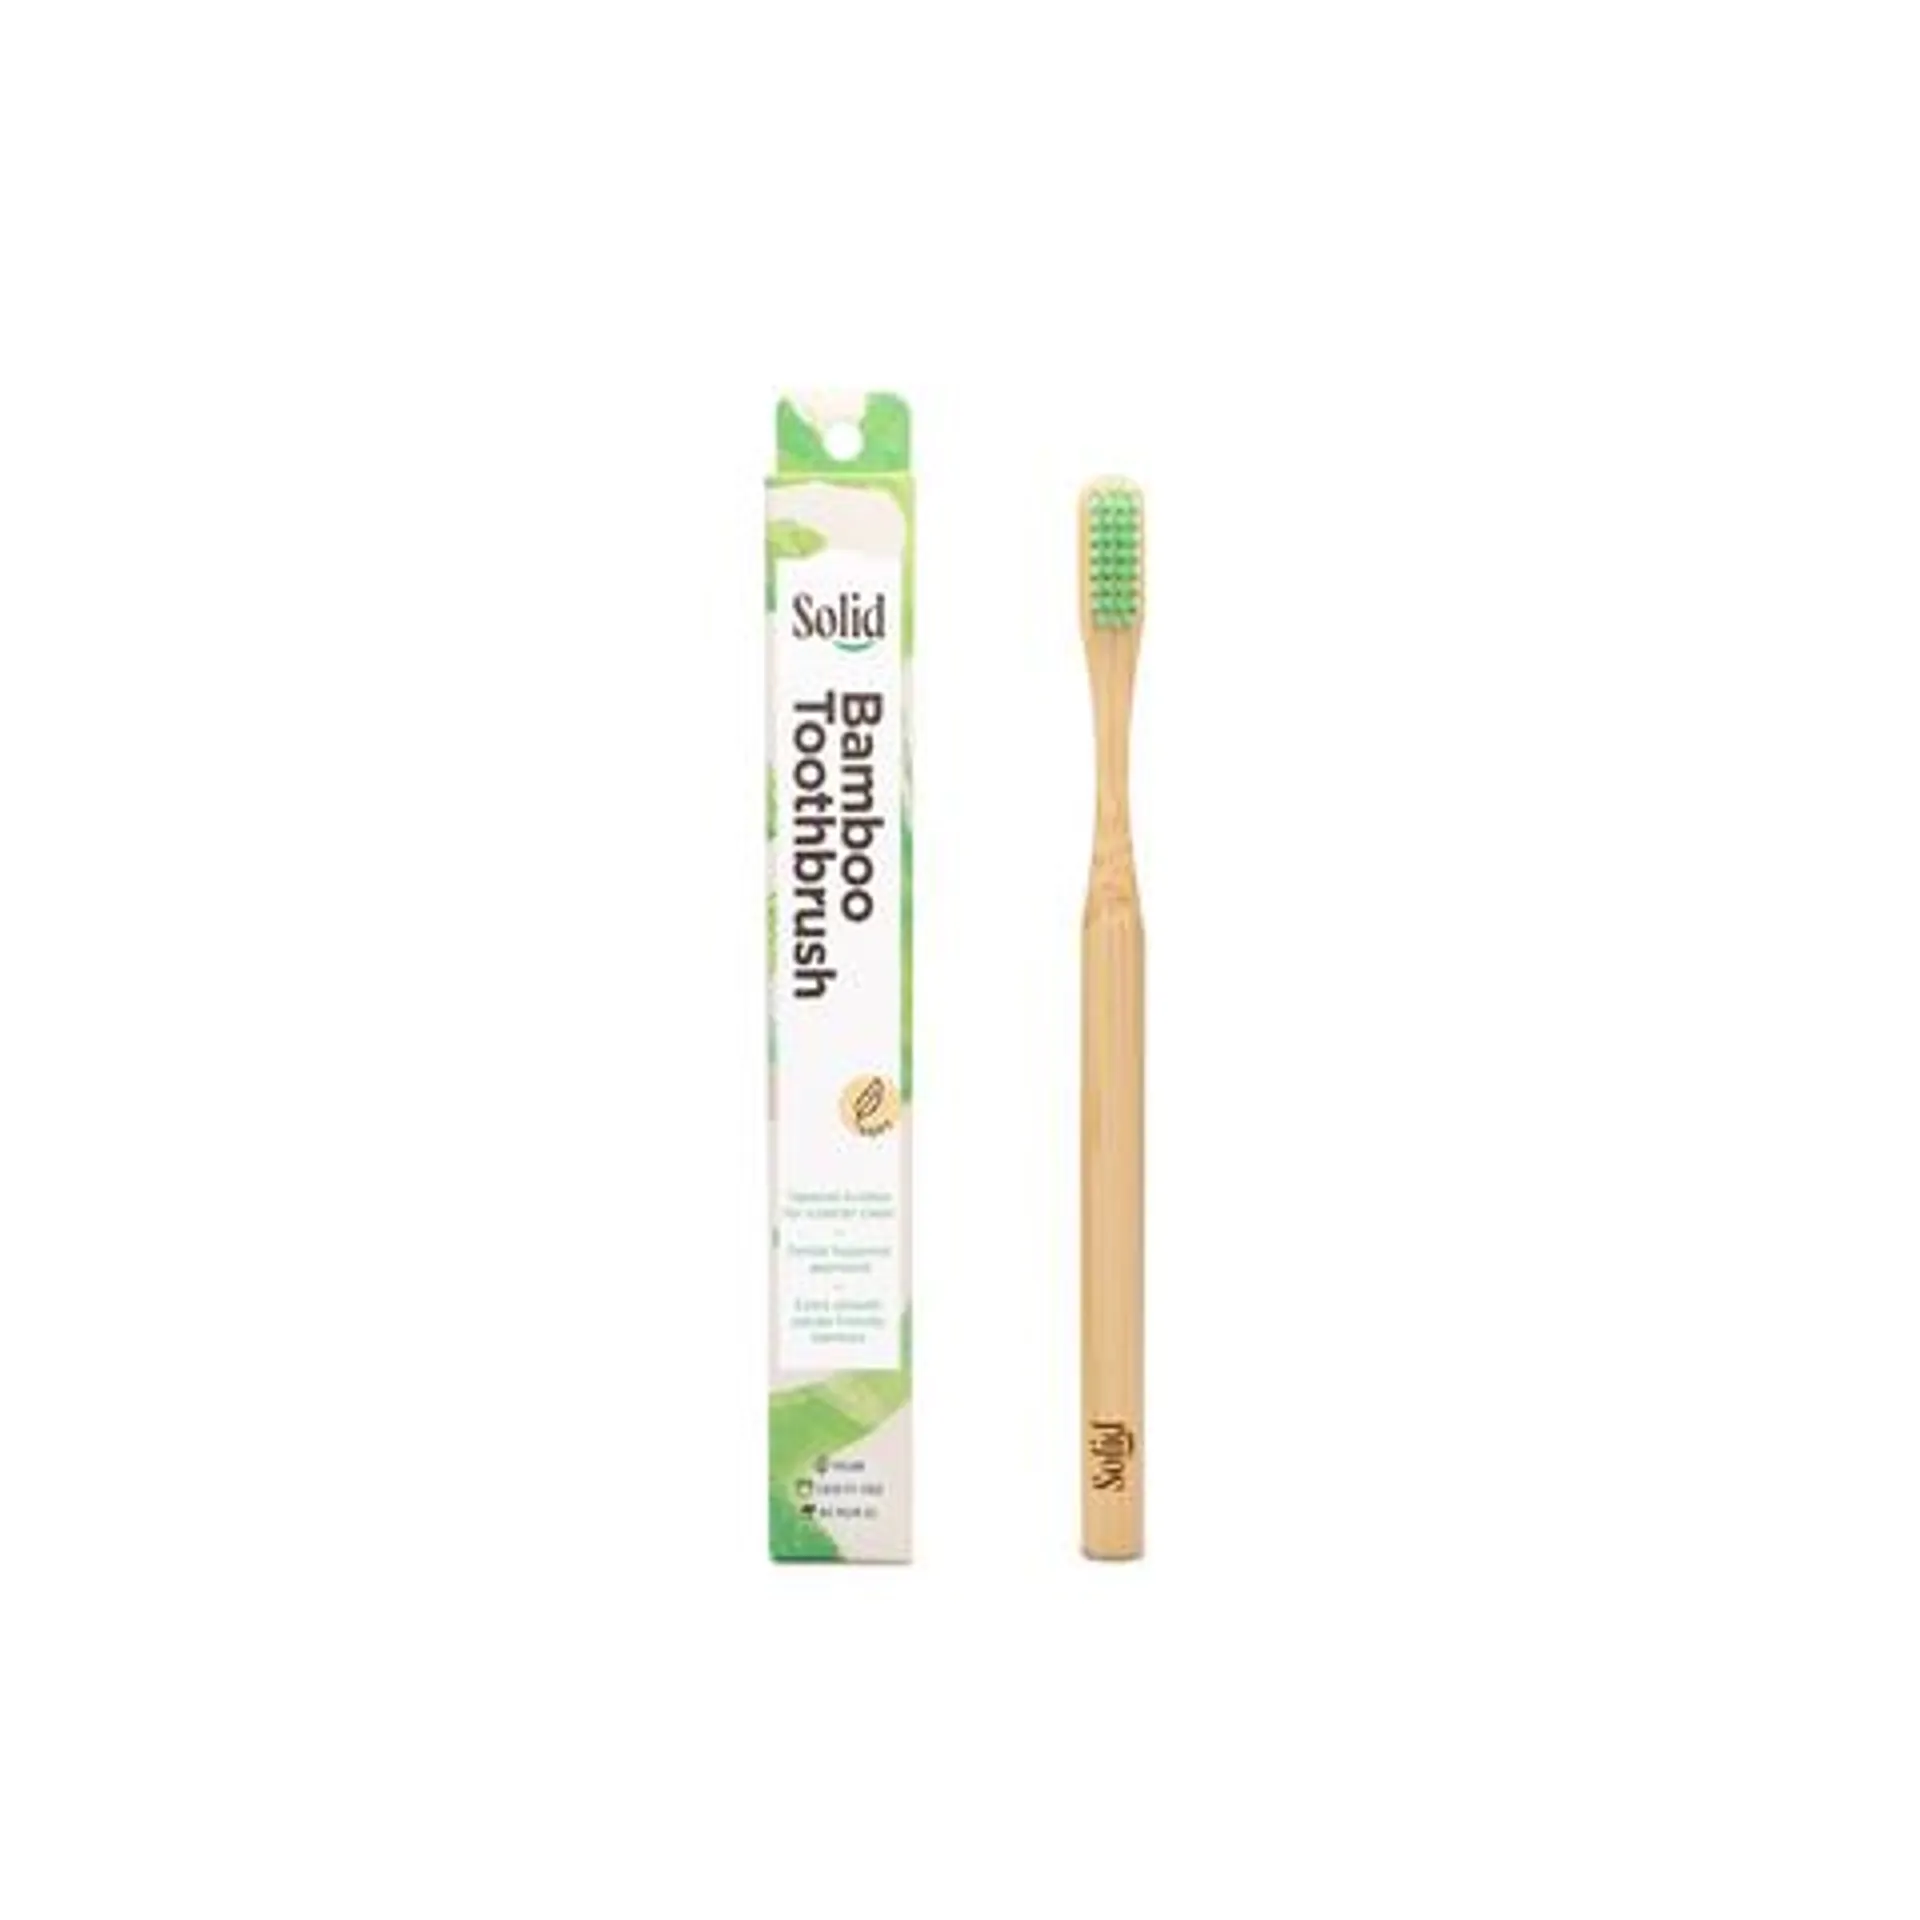 Solid Bamboo Toothbrush Adult Green, Soft